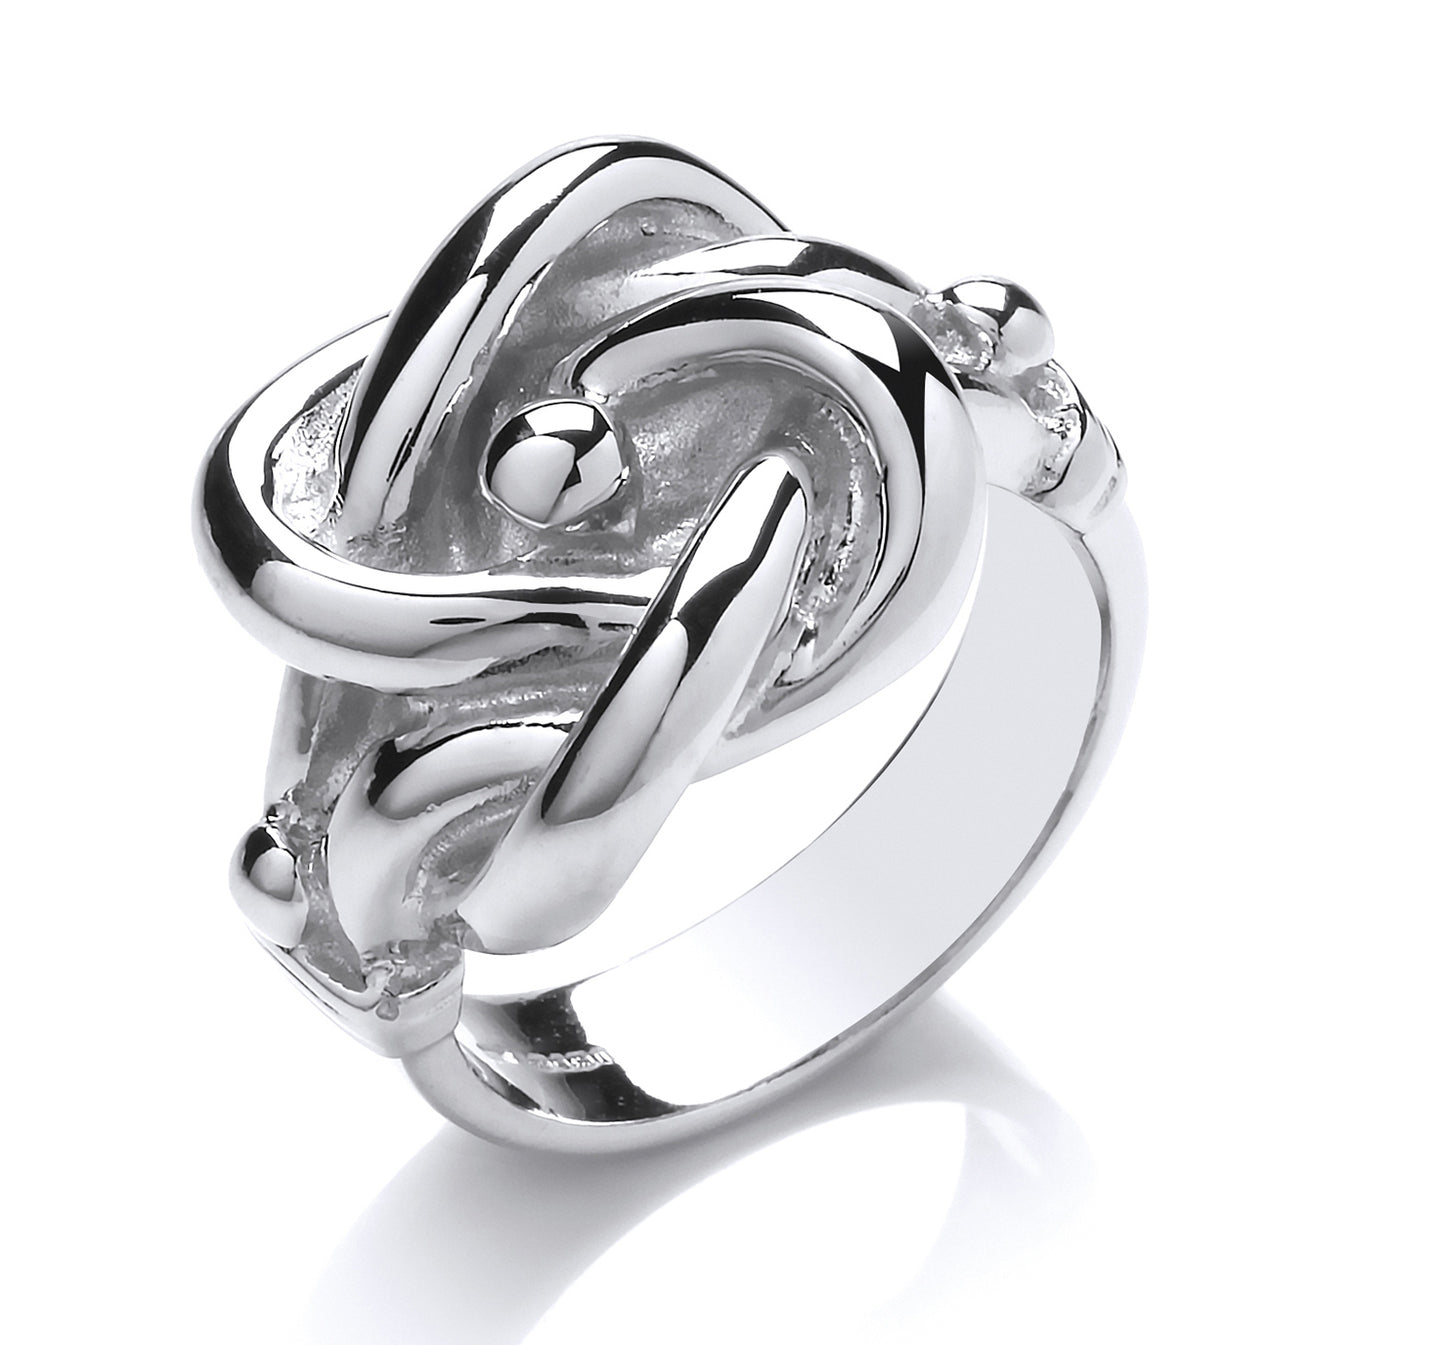 Mens Silver  Twisted Love Knot Signet Ring - GVR785